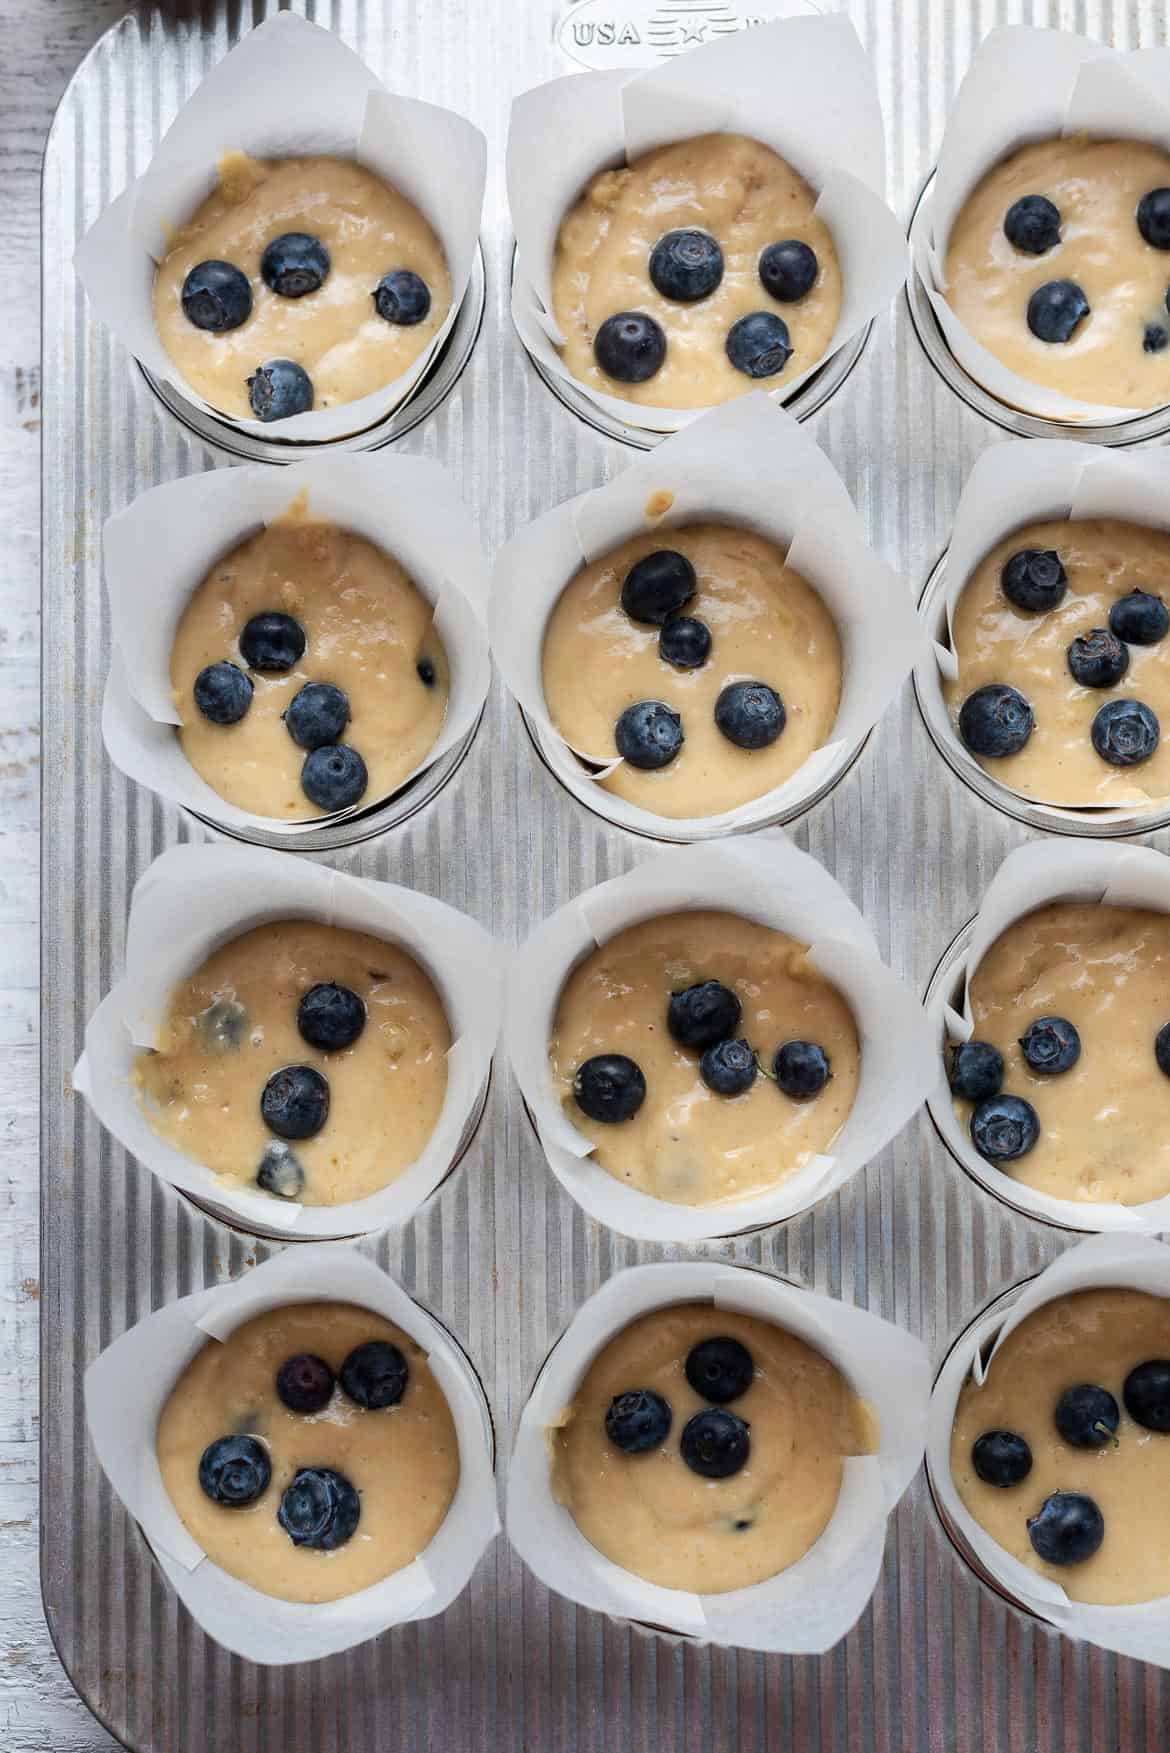 Batter with blueberries in a muffin pan.